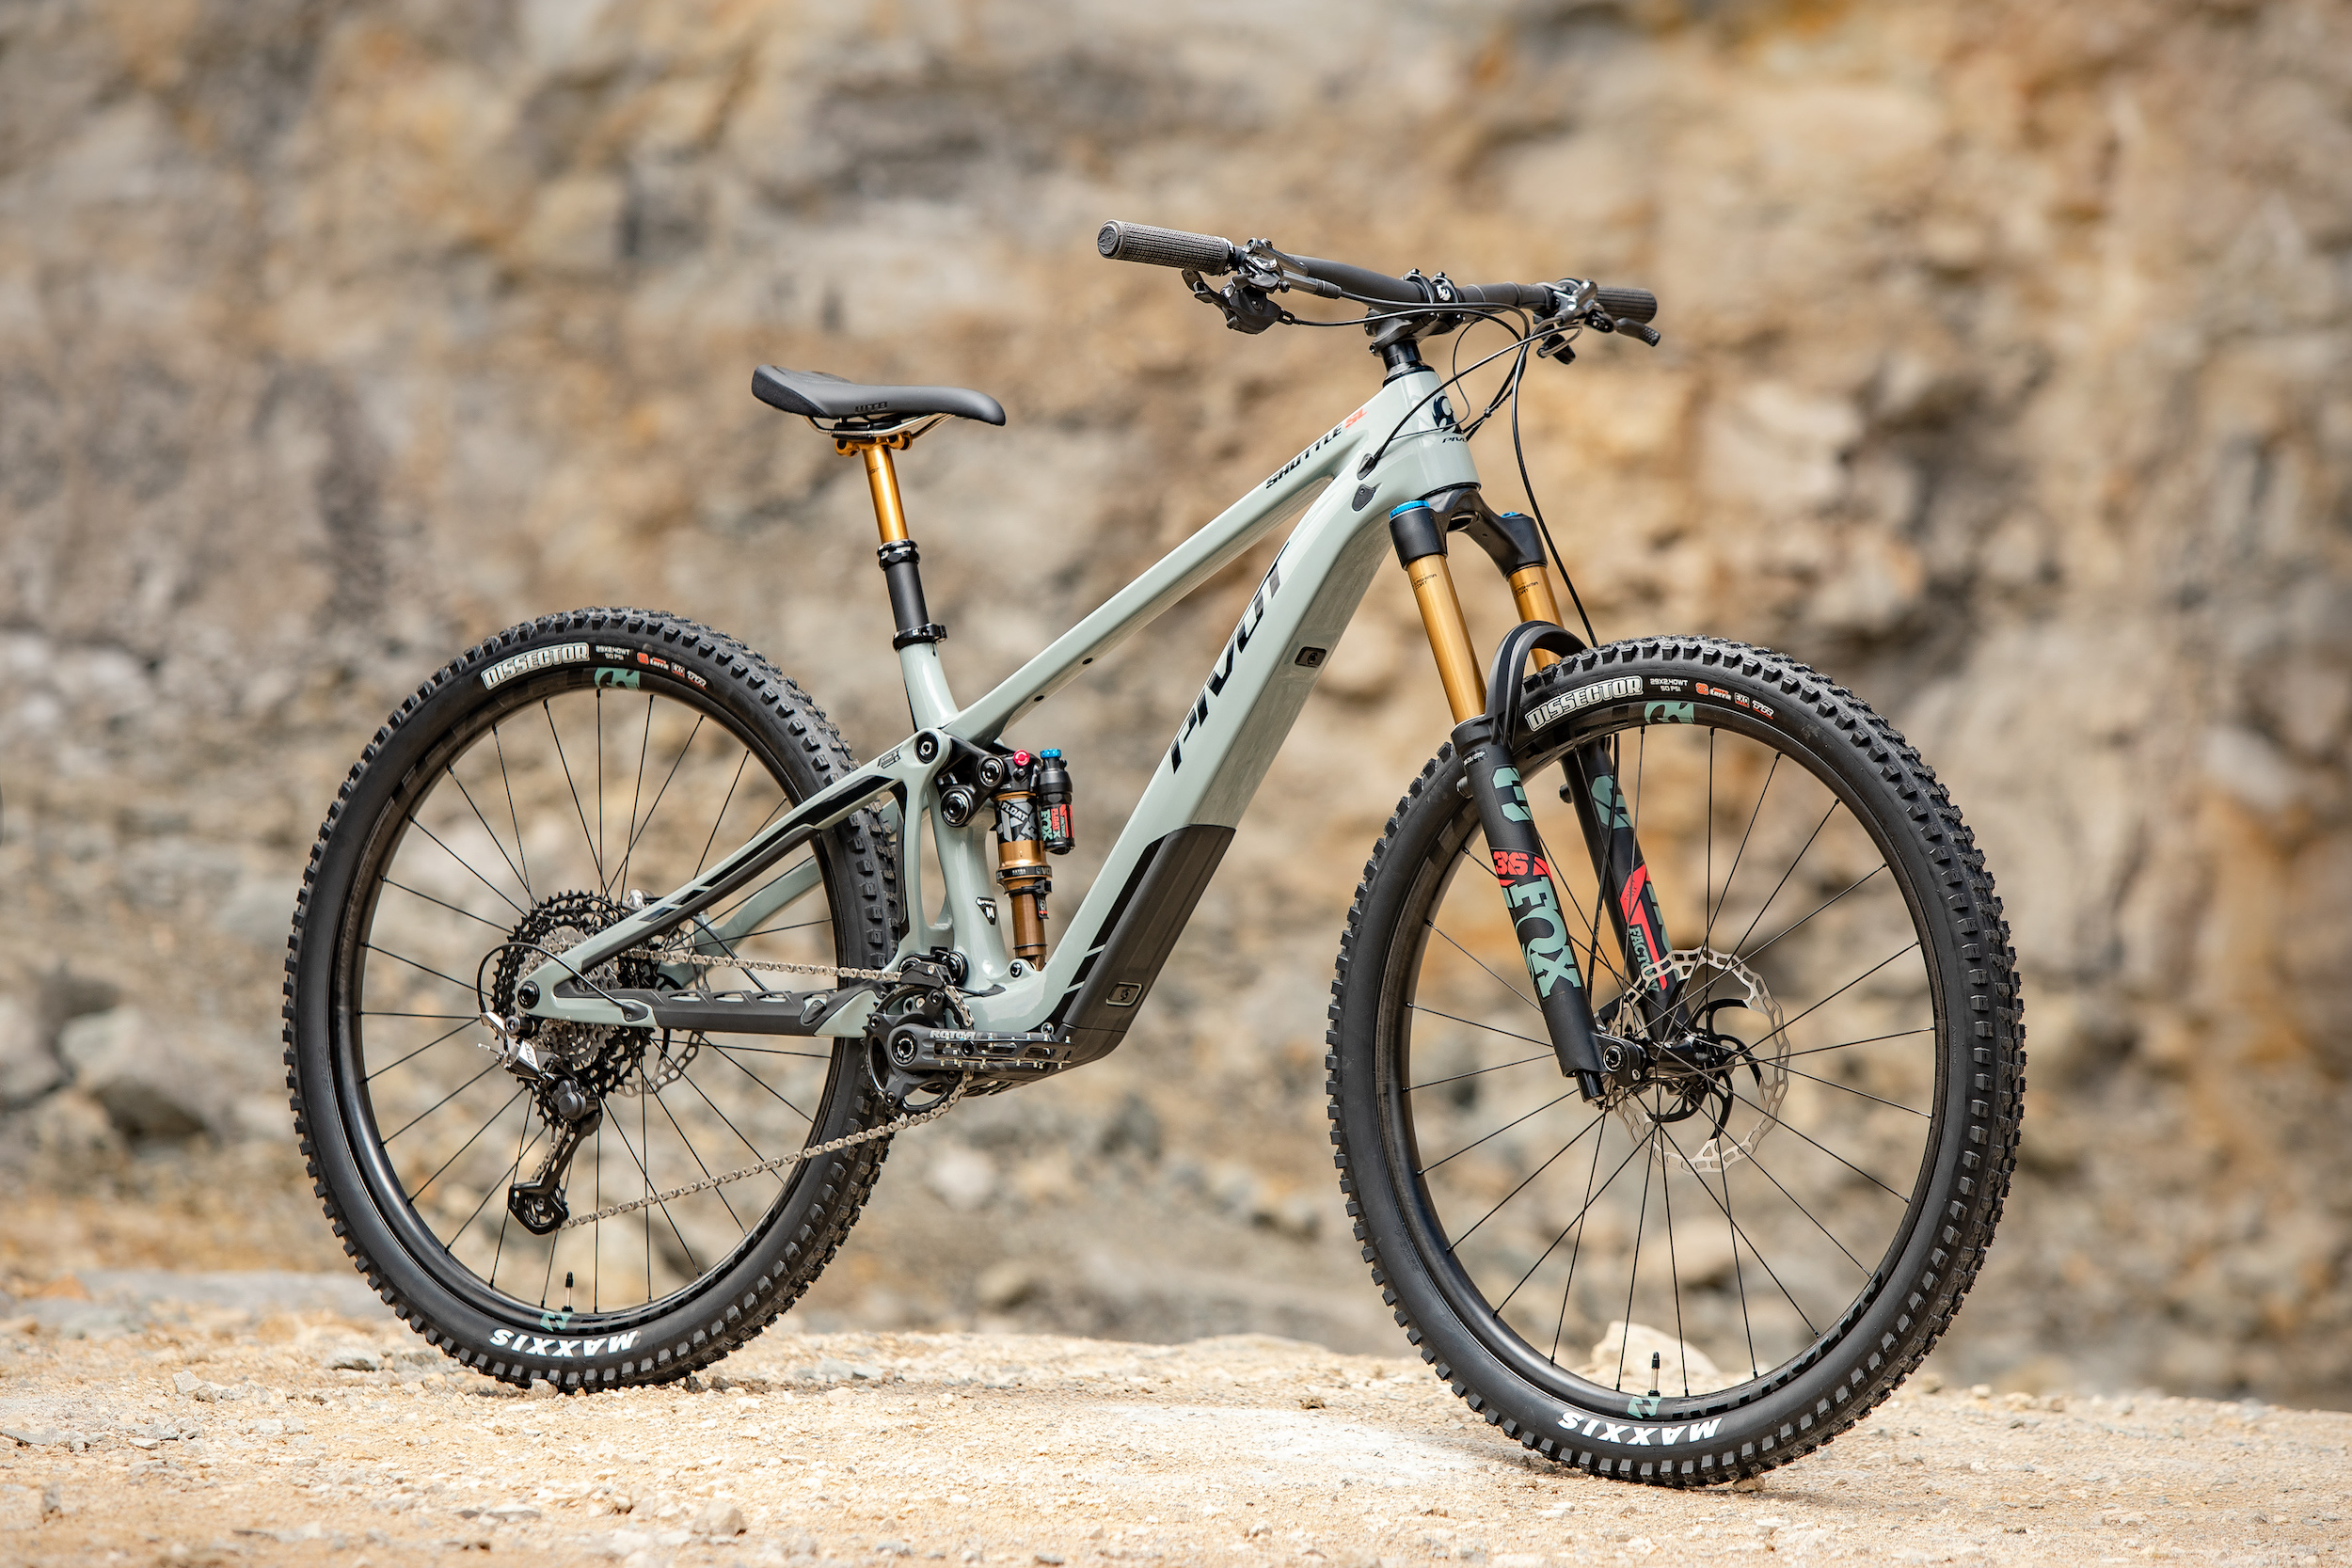 First Look The Pivot Shuttle SL is the lightest eMTB in its class